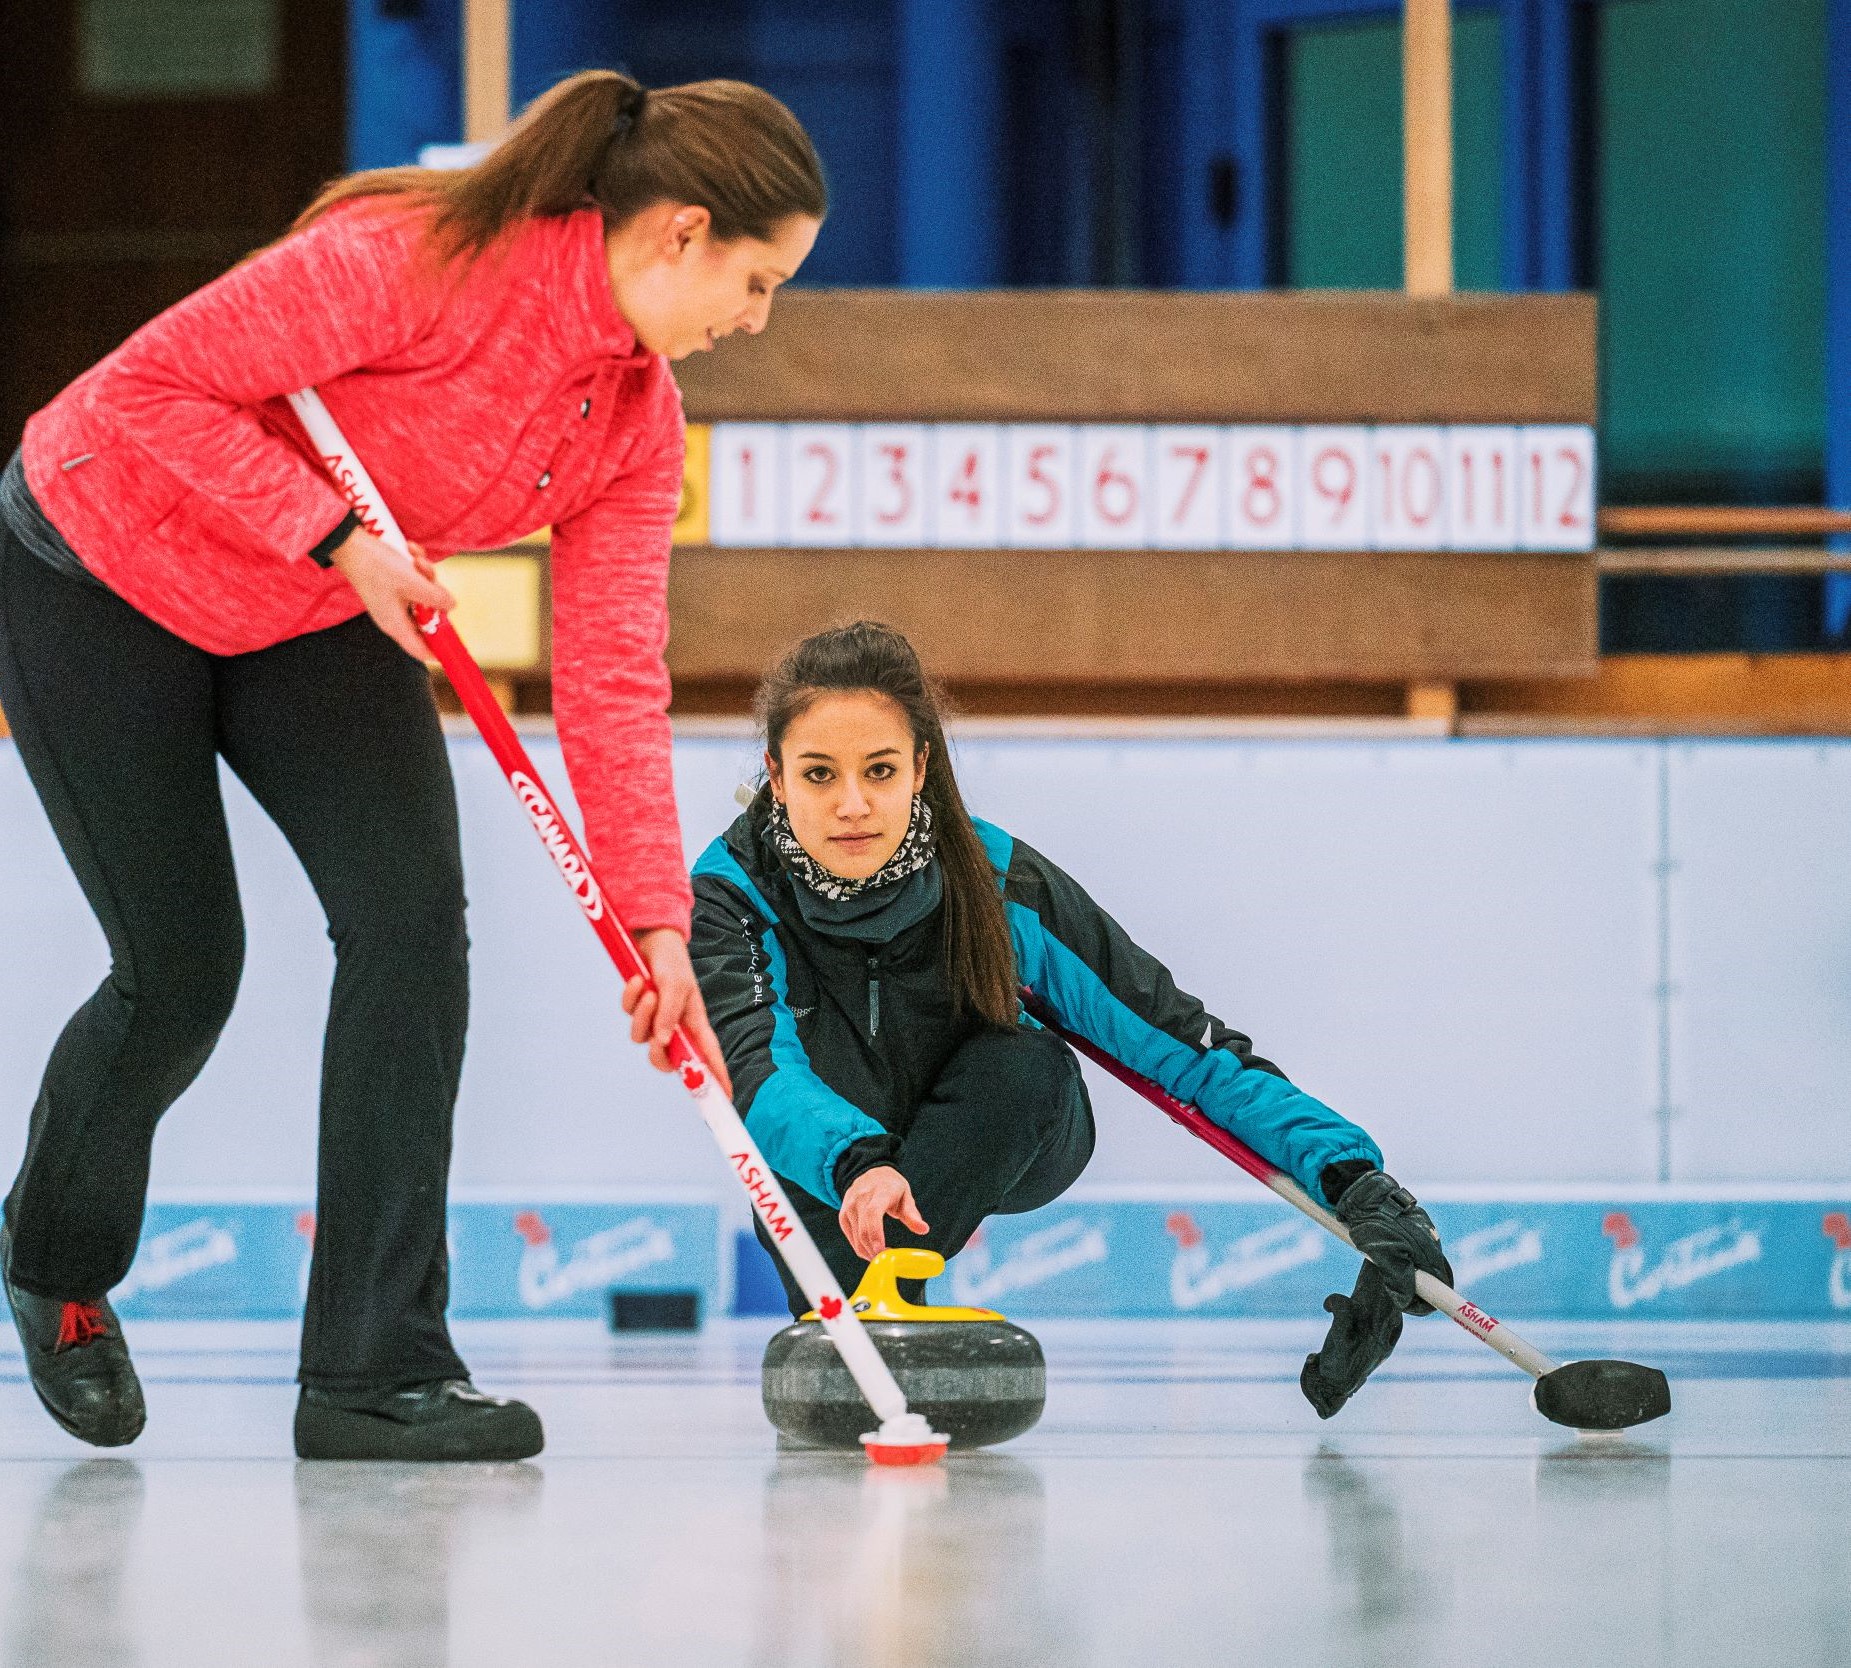 Ice Skating and Curling in Cortina d'Ampezzo - The official